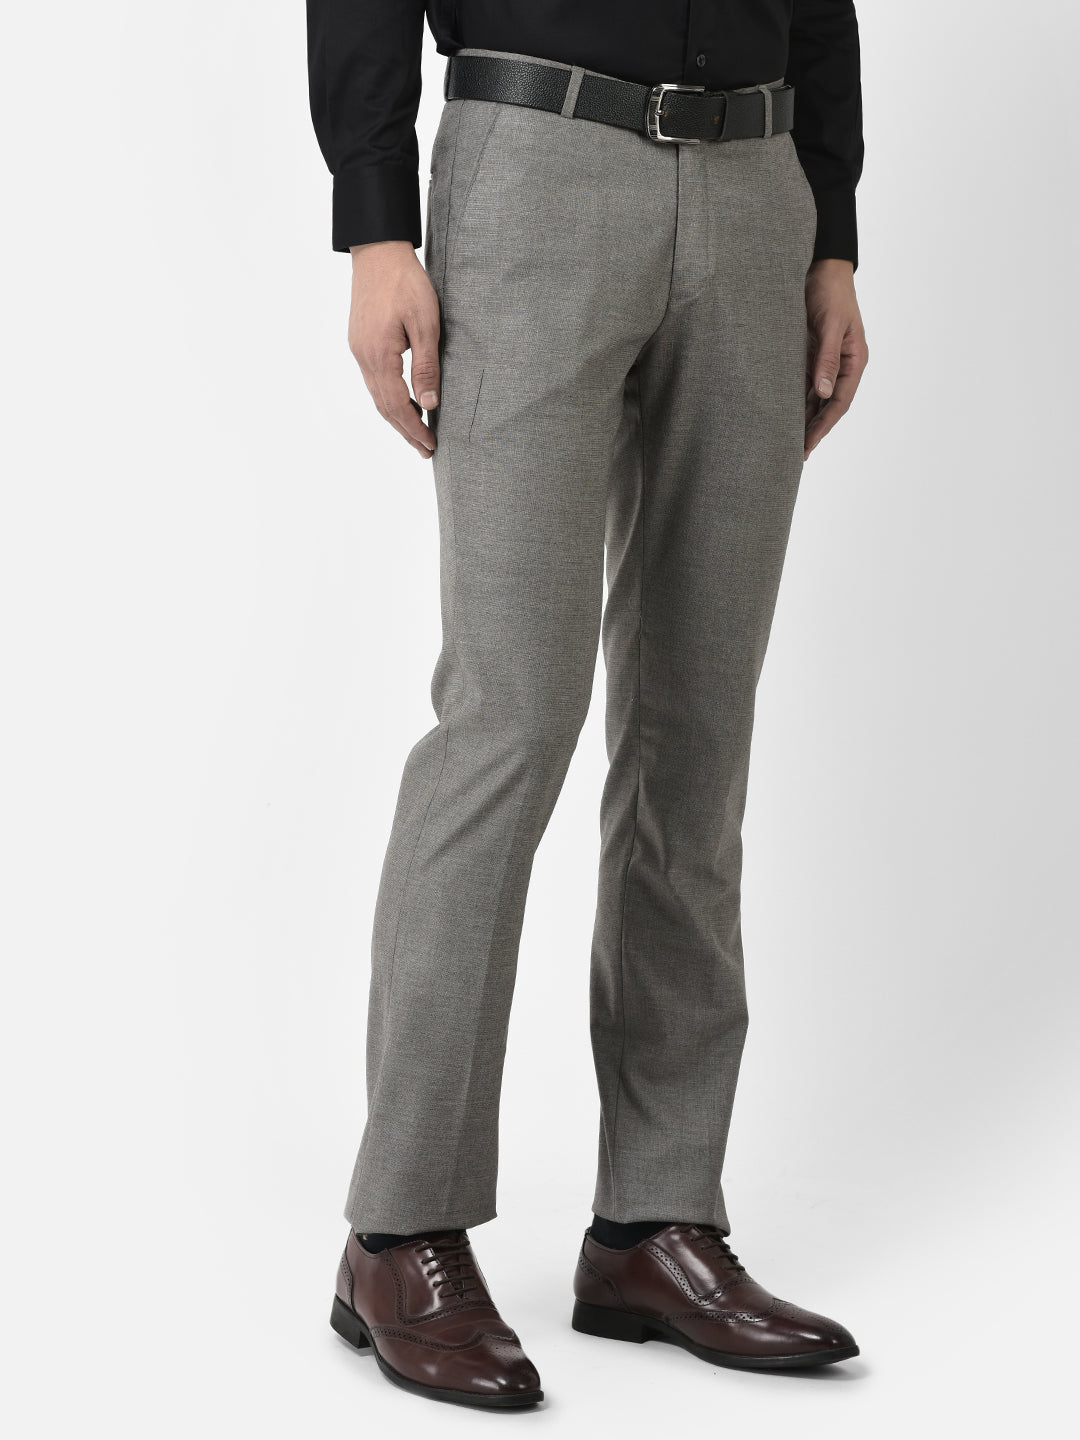 A Perfect Corduroy Suit for $150—Plus 5 Others If You're Picky | GQ